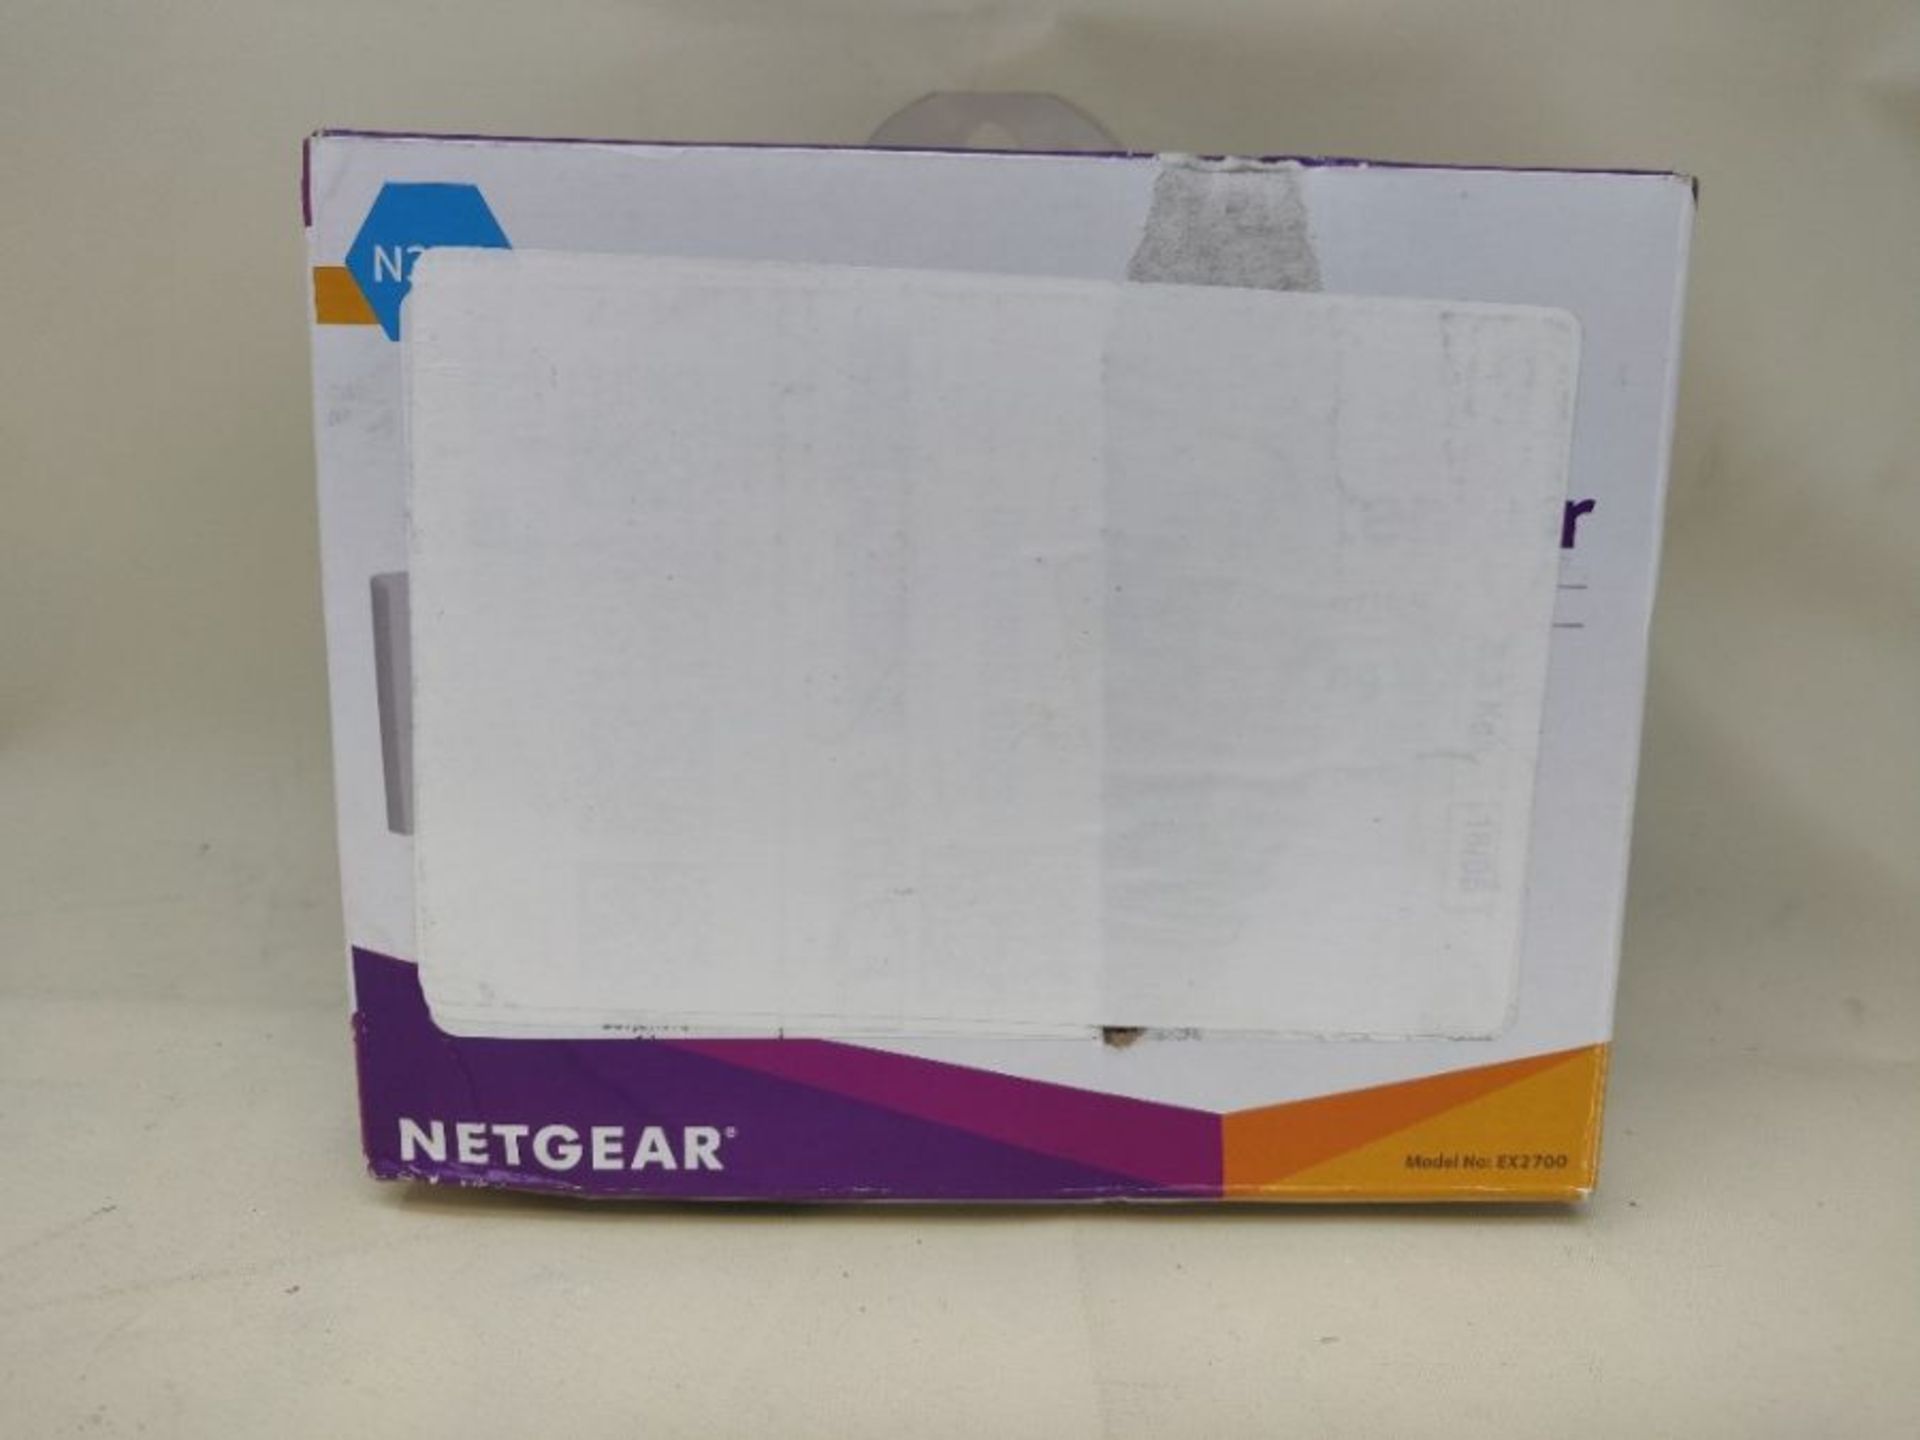 NETGEAR Wi-Fi Range Extender EX2700 - Coverage up to 600 sq.ft. and 10 devices with N3 - Image 2 of 3